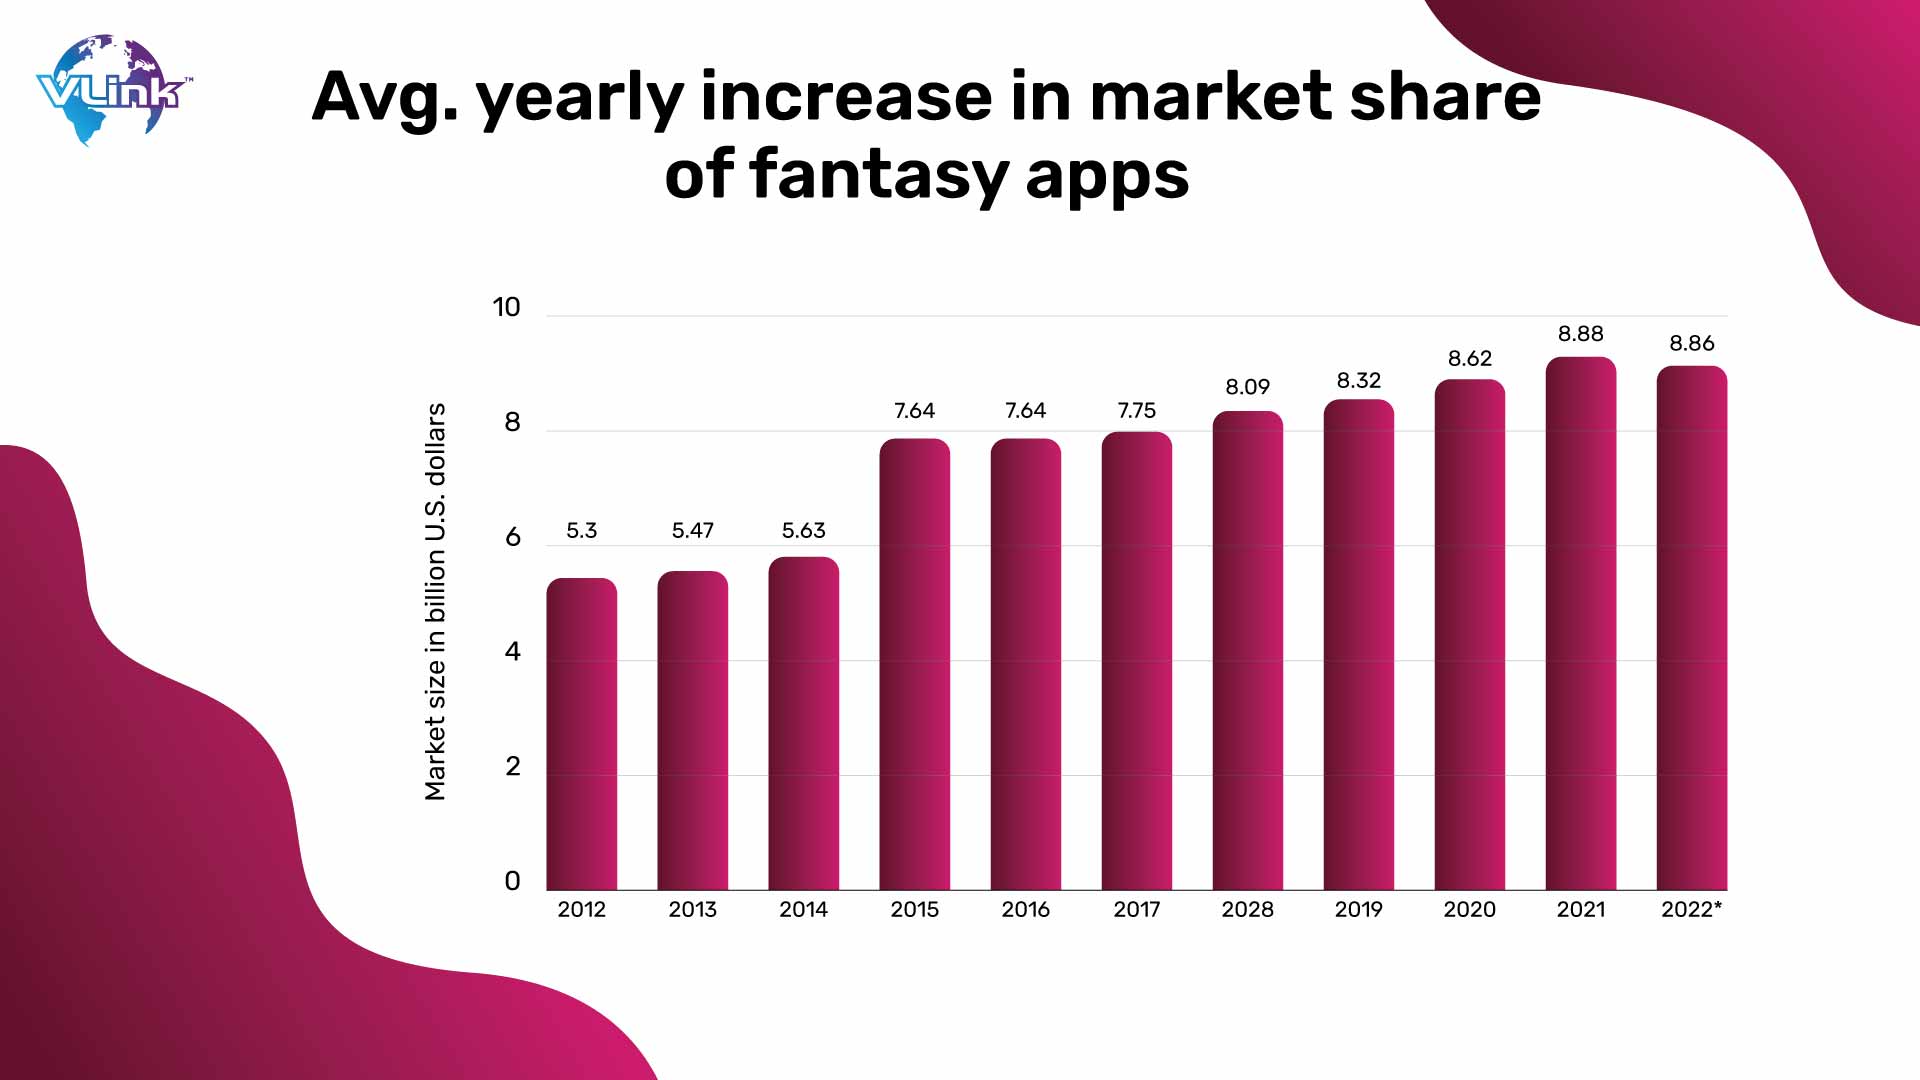 Avg. yearly increase in market share of fantasy apps